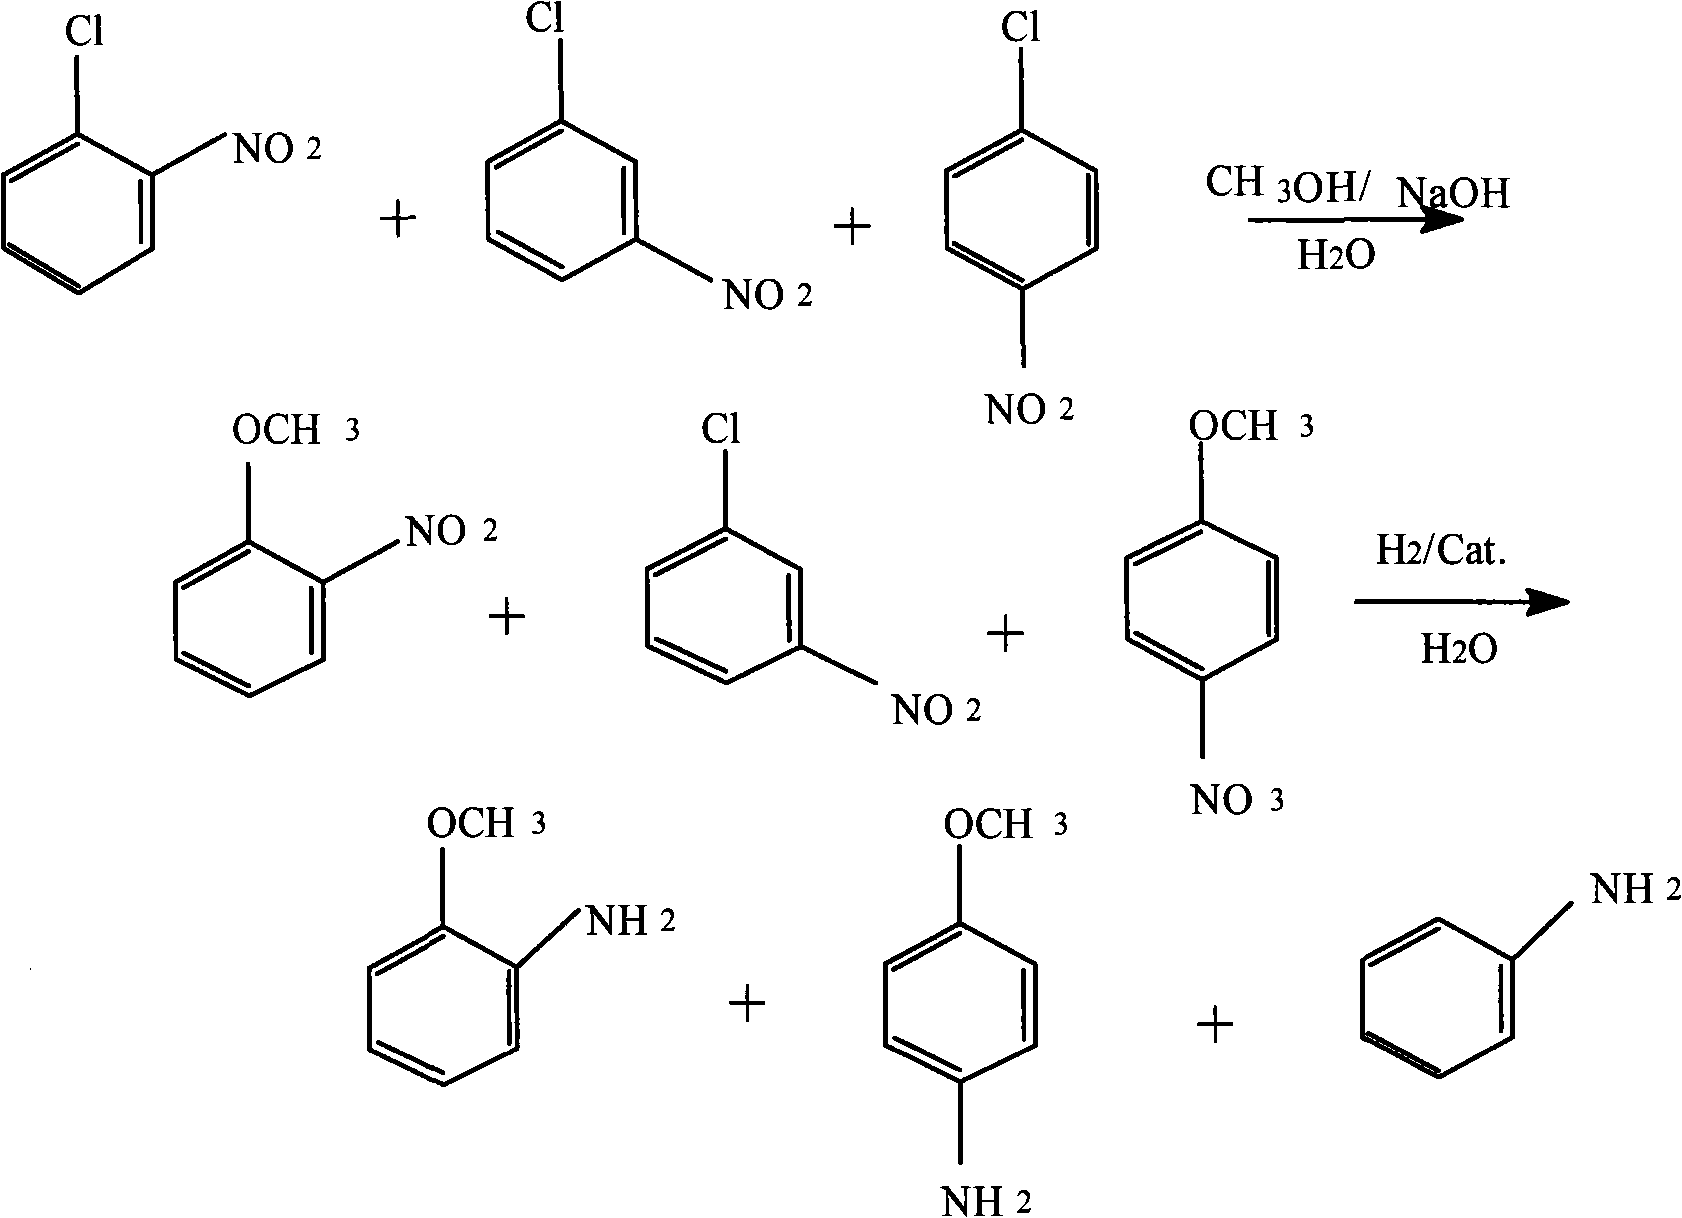 Method for producing anisidine by mixed nitrochlorobenzene reacting in aqueous solvent